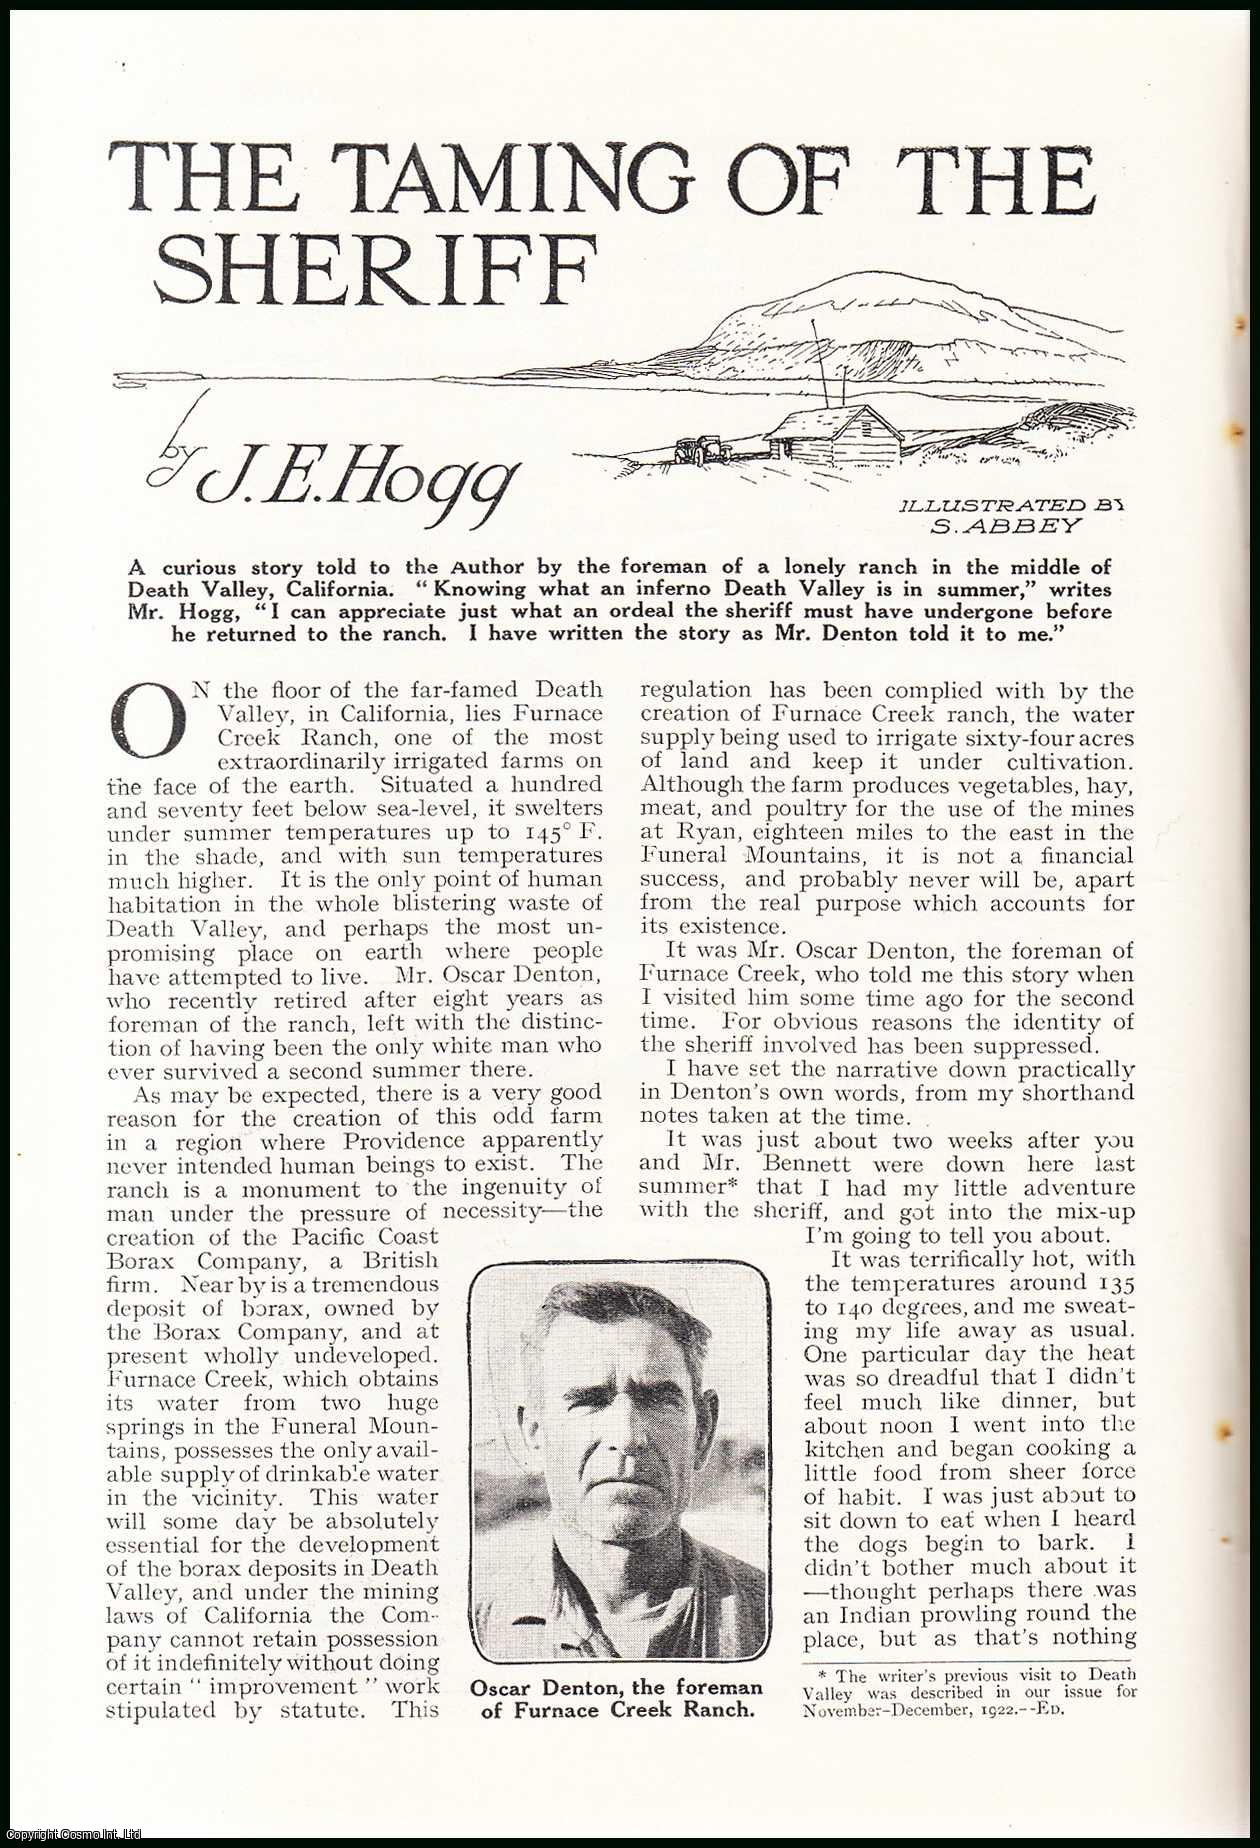 J.E. Hogg. Illustrated by S. Abbey. - The Taming of the Sheriff, Oscar Denton, the foreman of Furnace Creek : Death Valley, California. An uncommon original article from the Wide World Magazine, 1925.